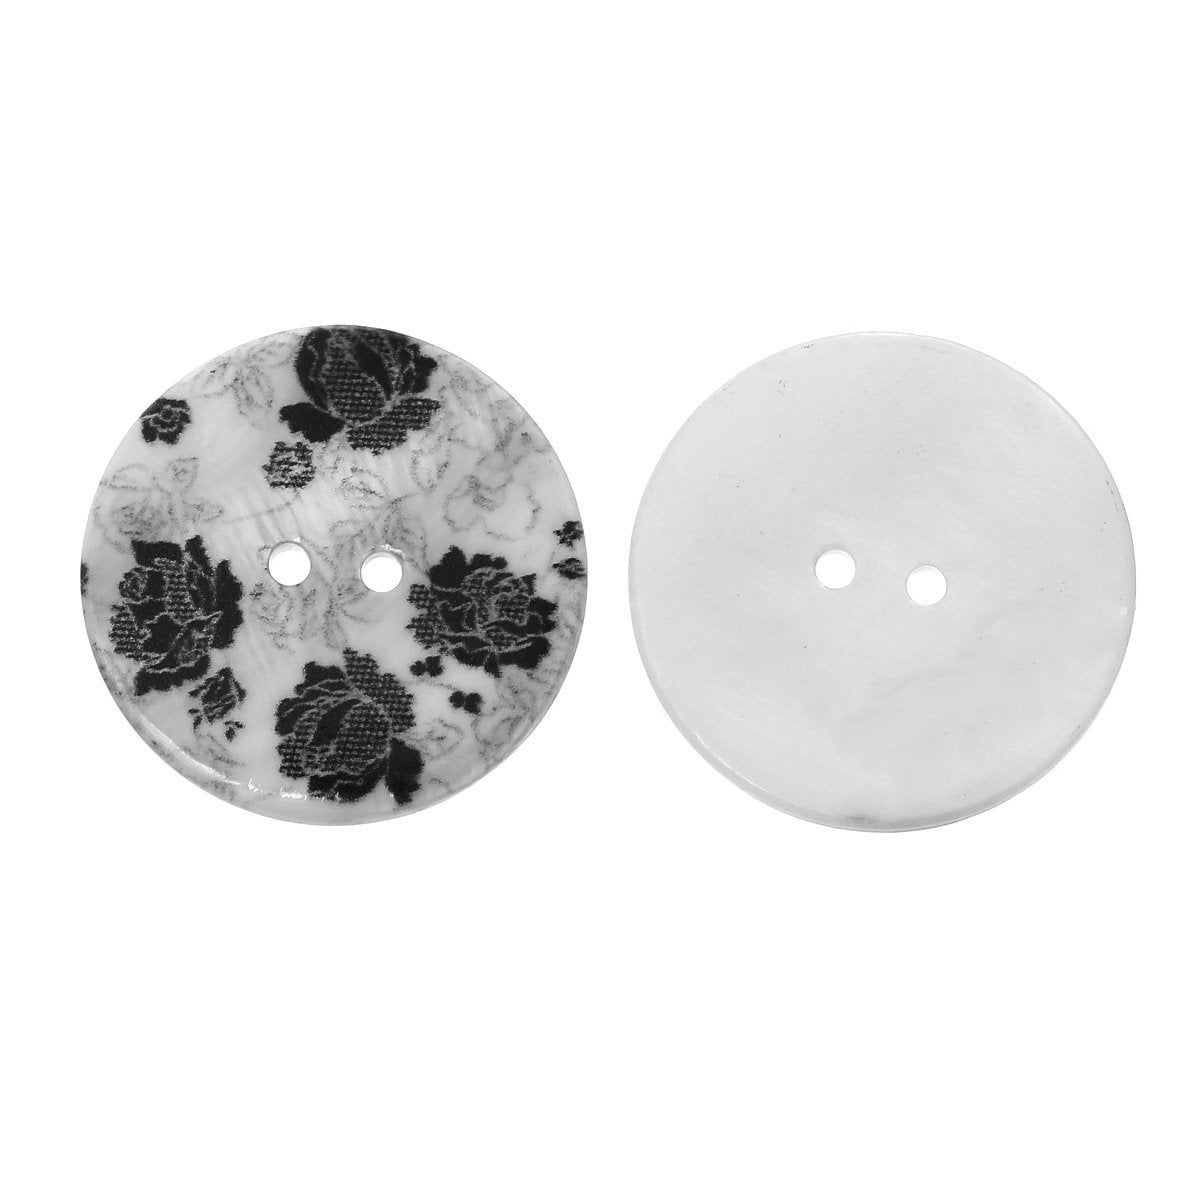 Flower buttons - Mother of Pearl Shell Buttons 30mm - set of 4 eco friendly natural buttons